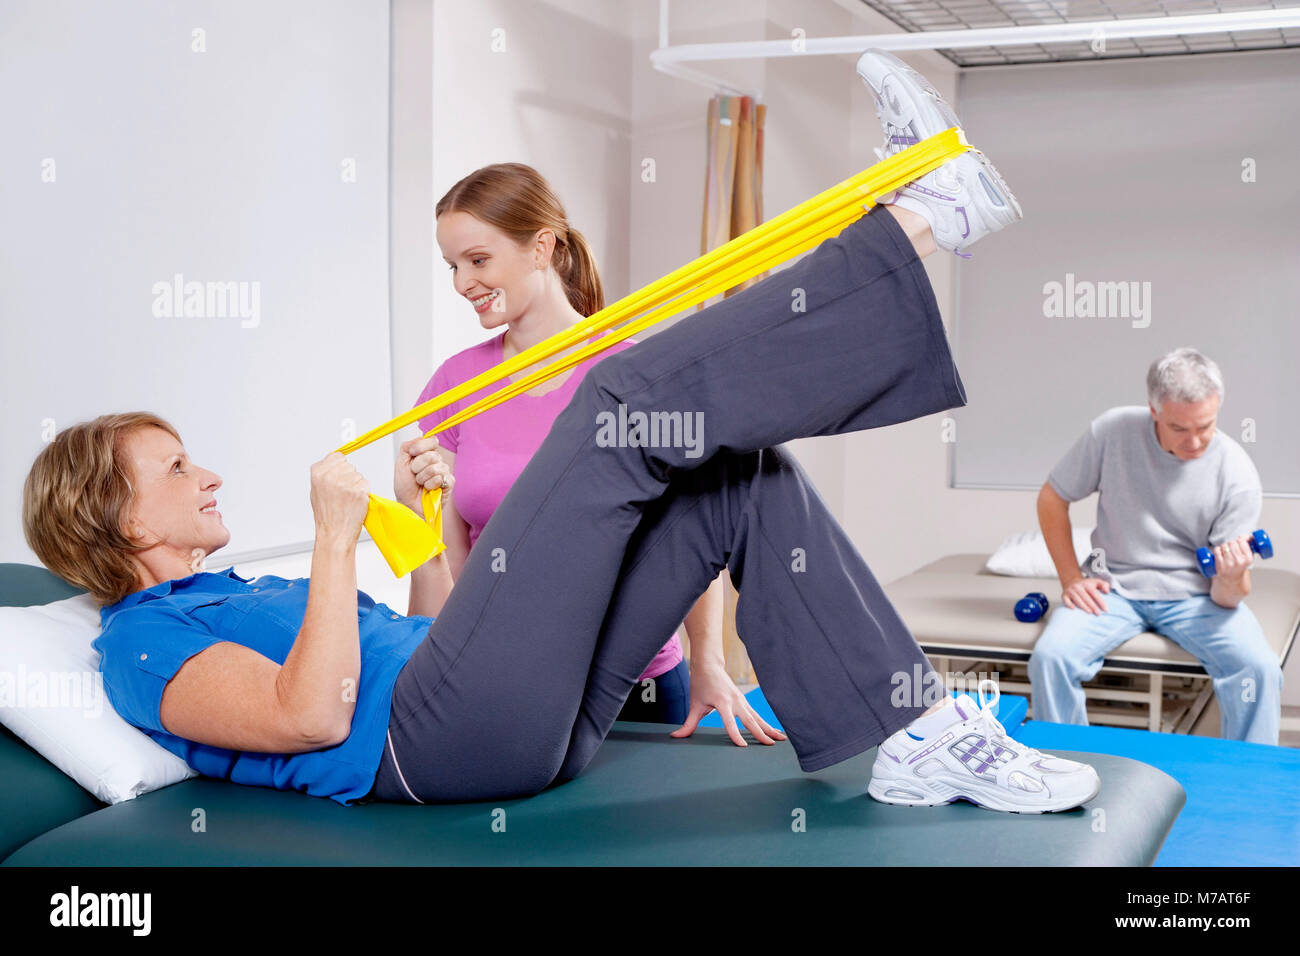 Physiotherapist assisting a patient in exercising Stock Photo